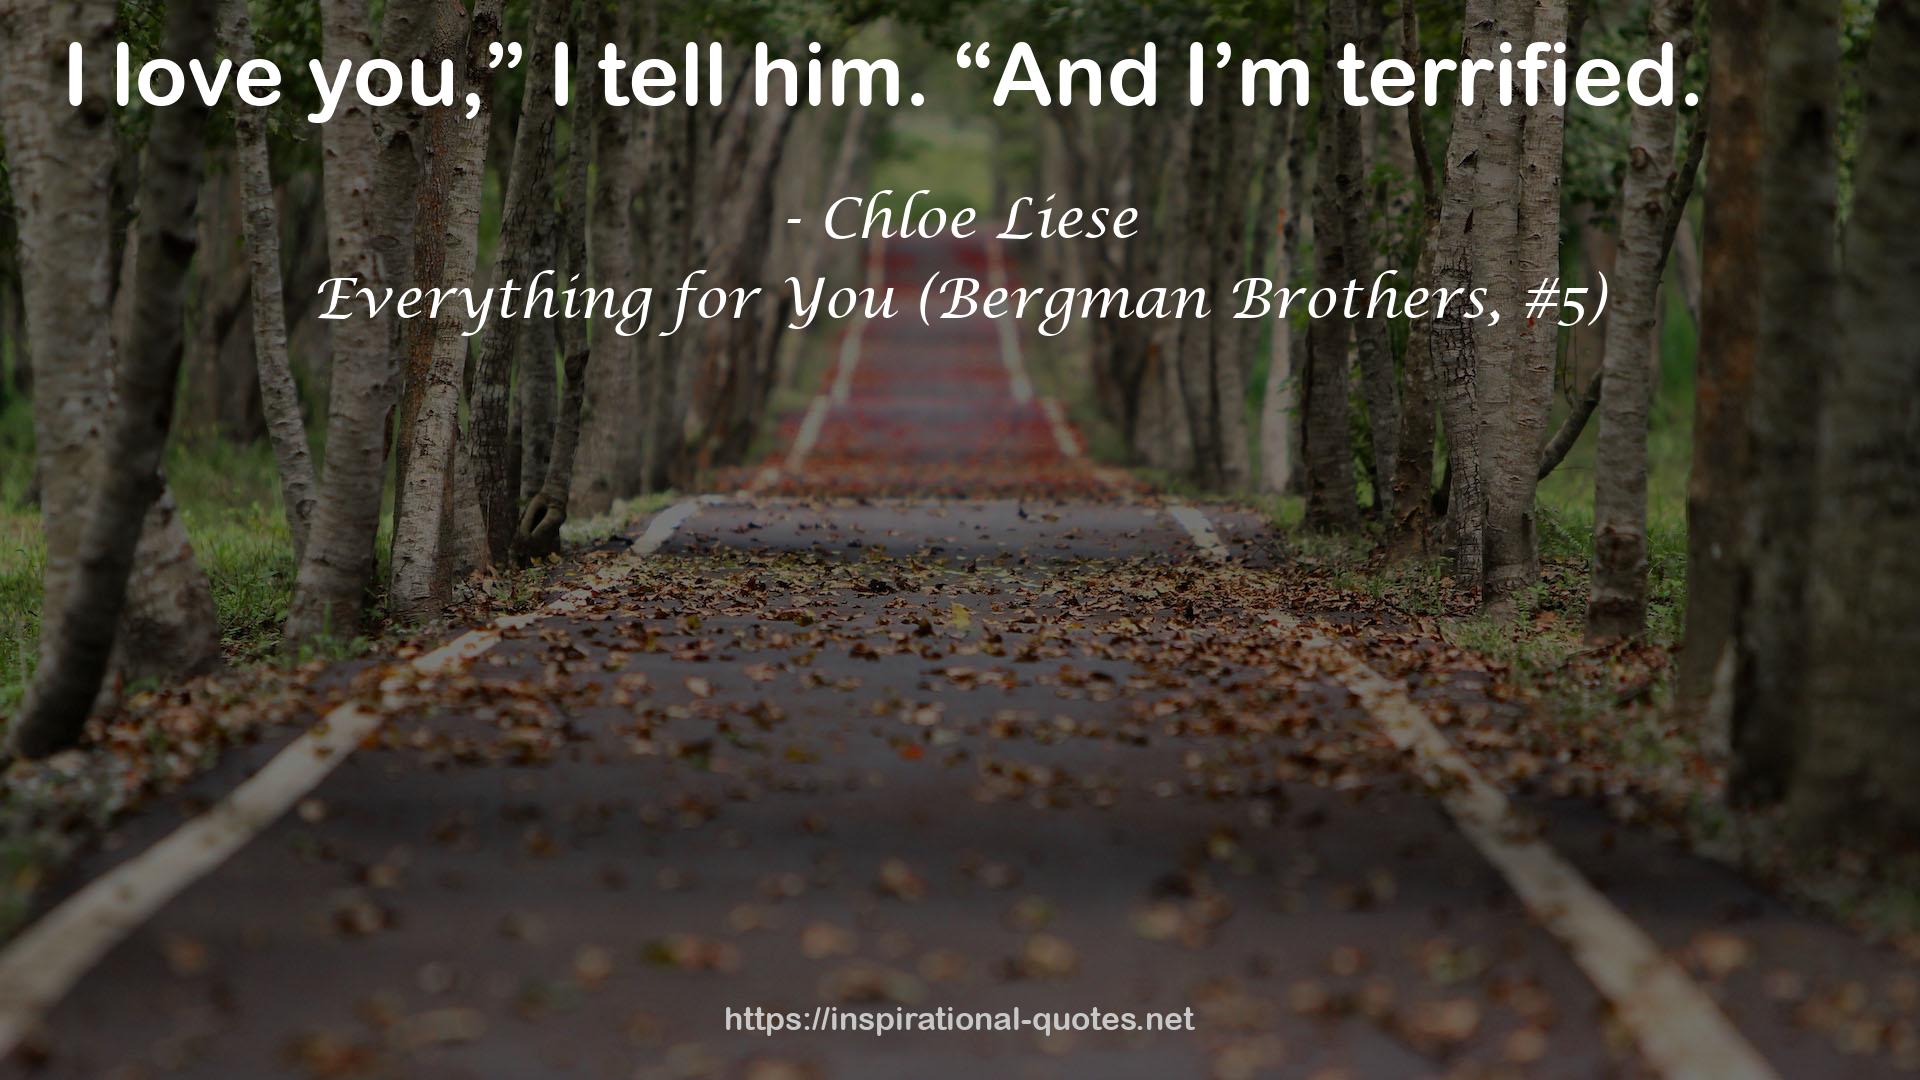 Chloe Liese QUOTES